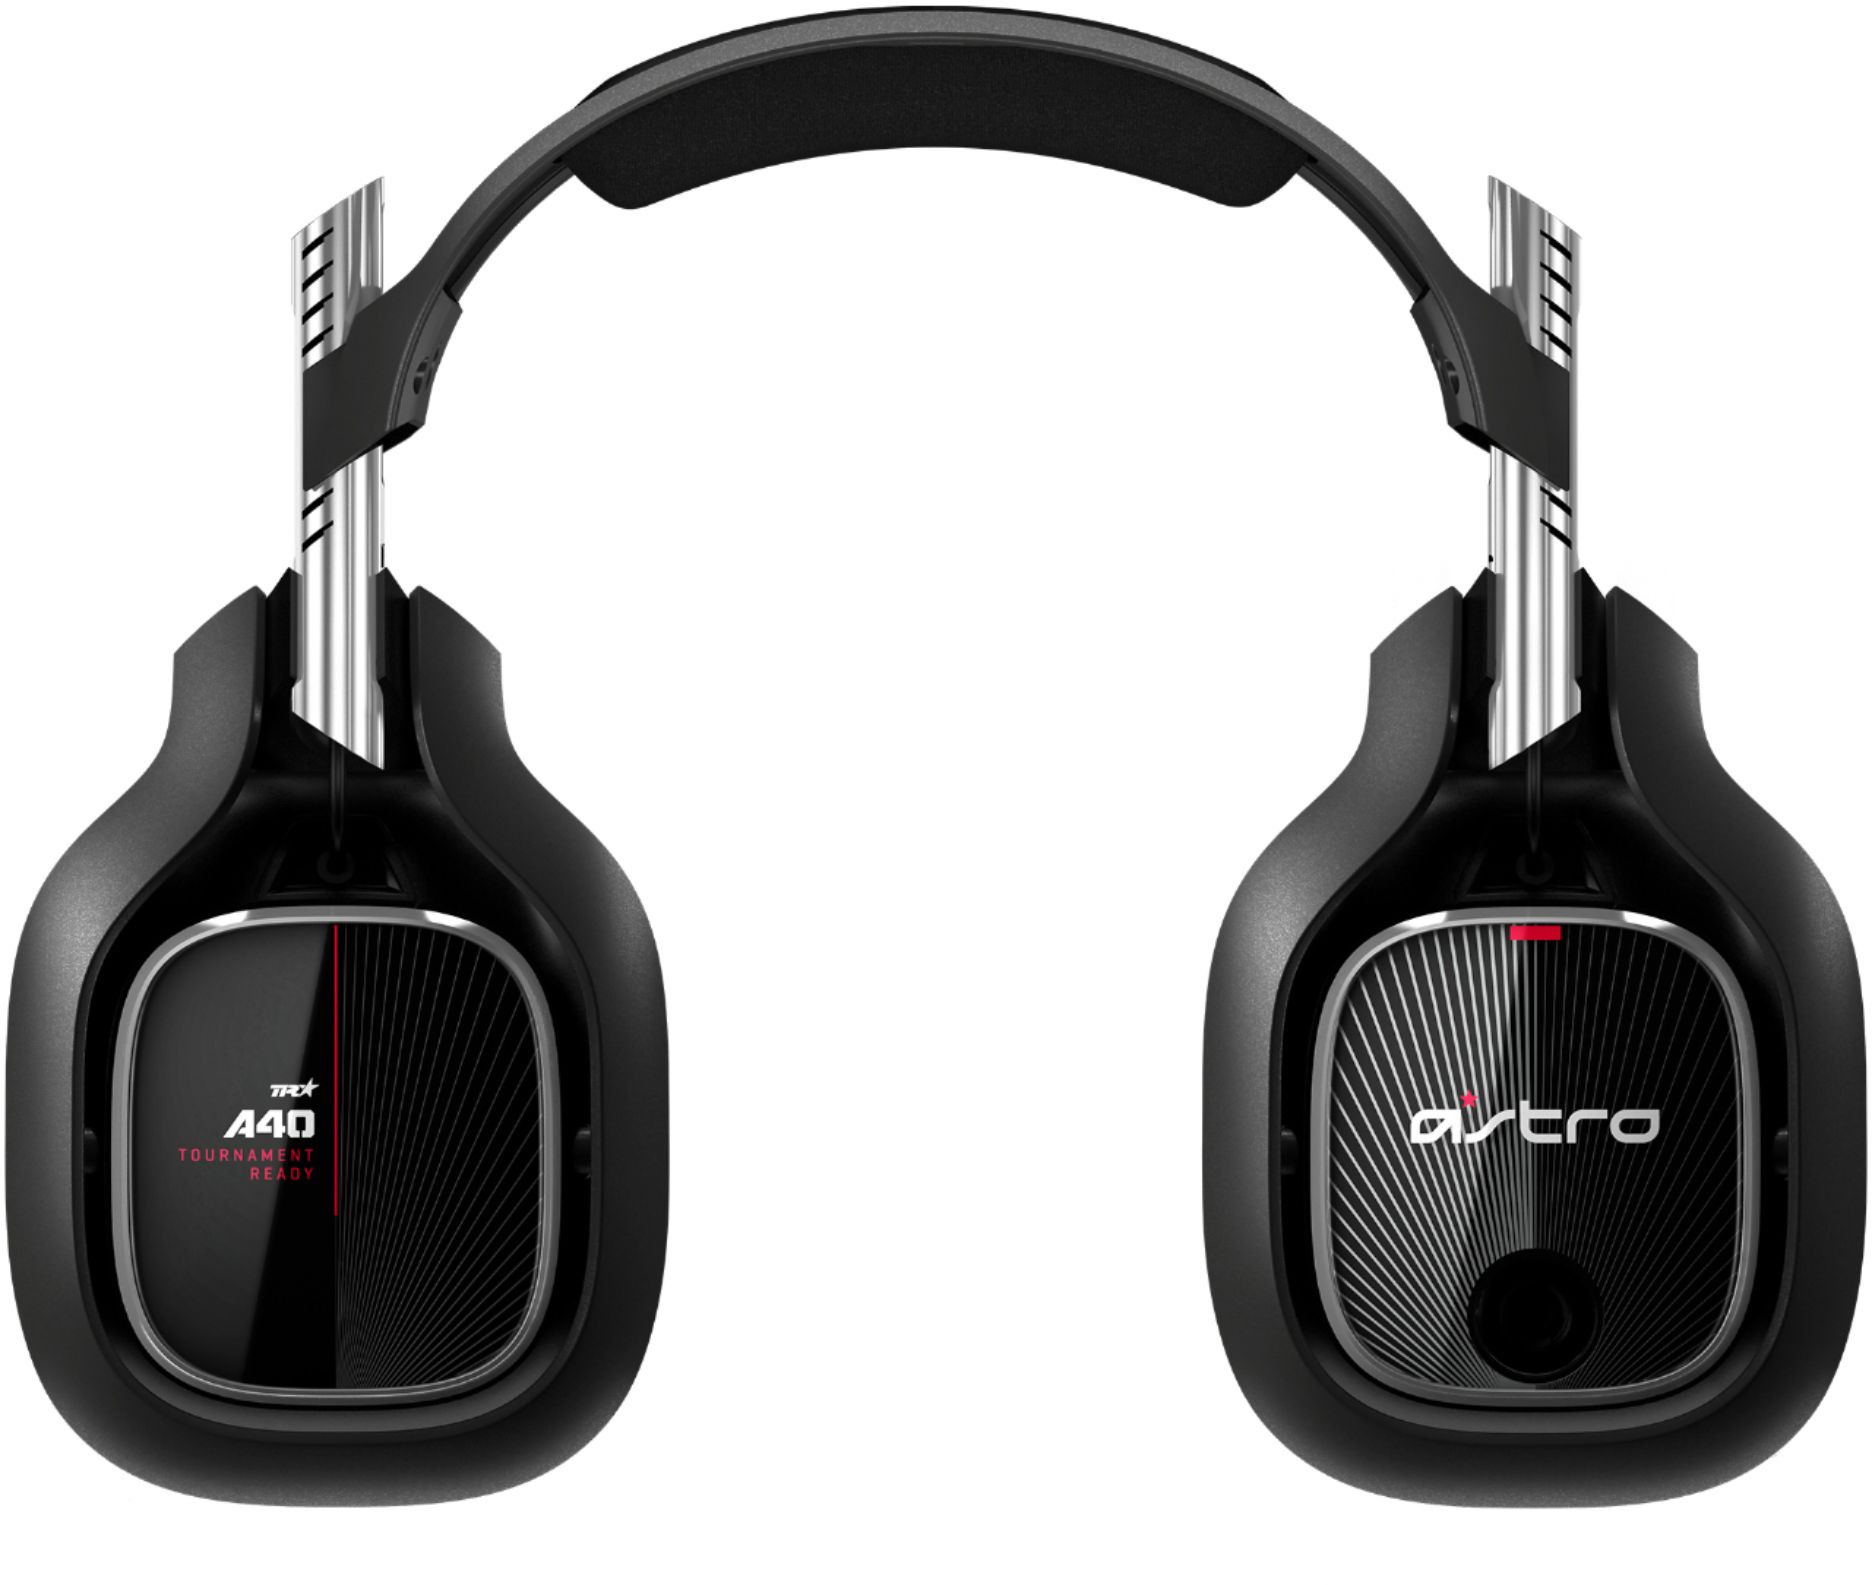 astro gaming a40 tr wired stereo gaming headset for xbox one